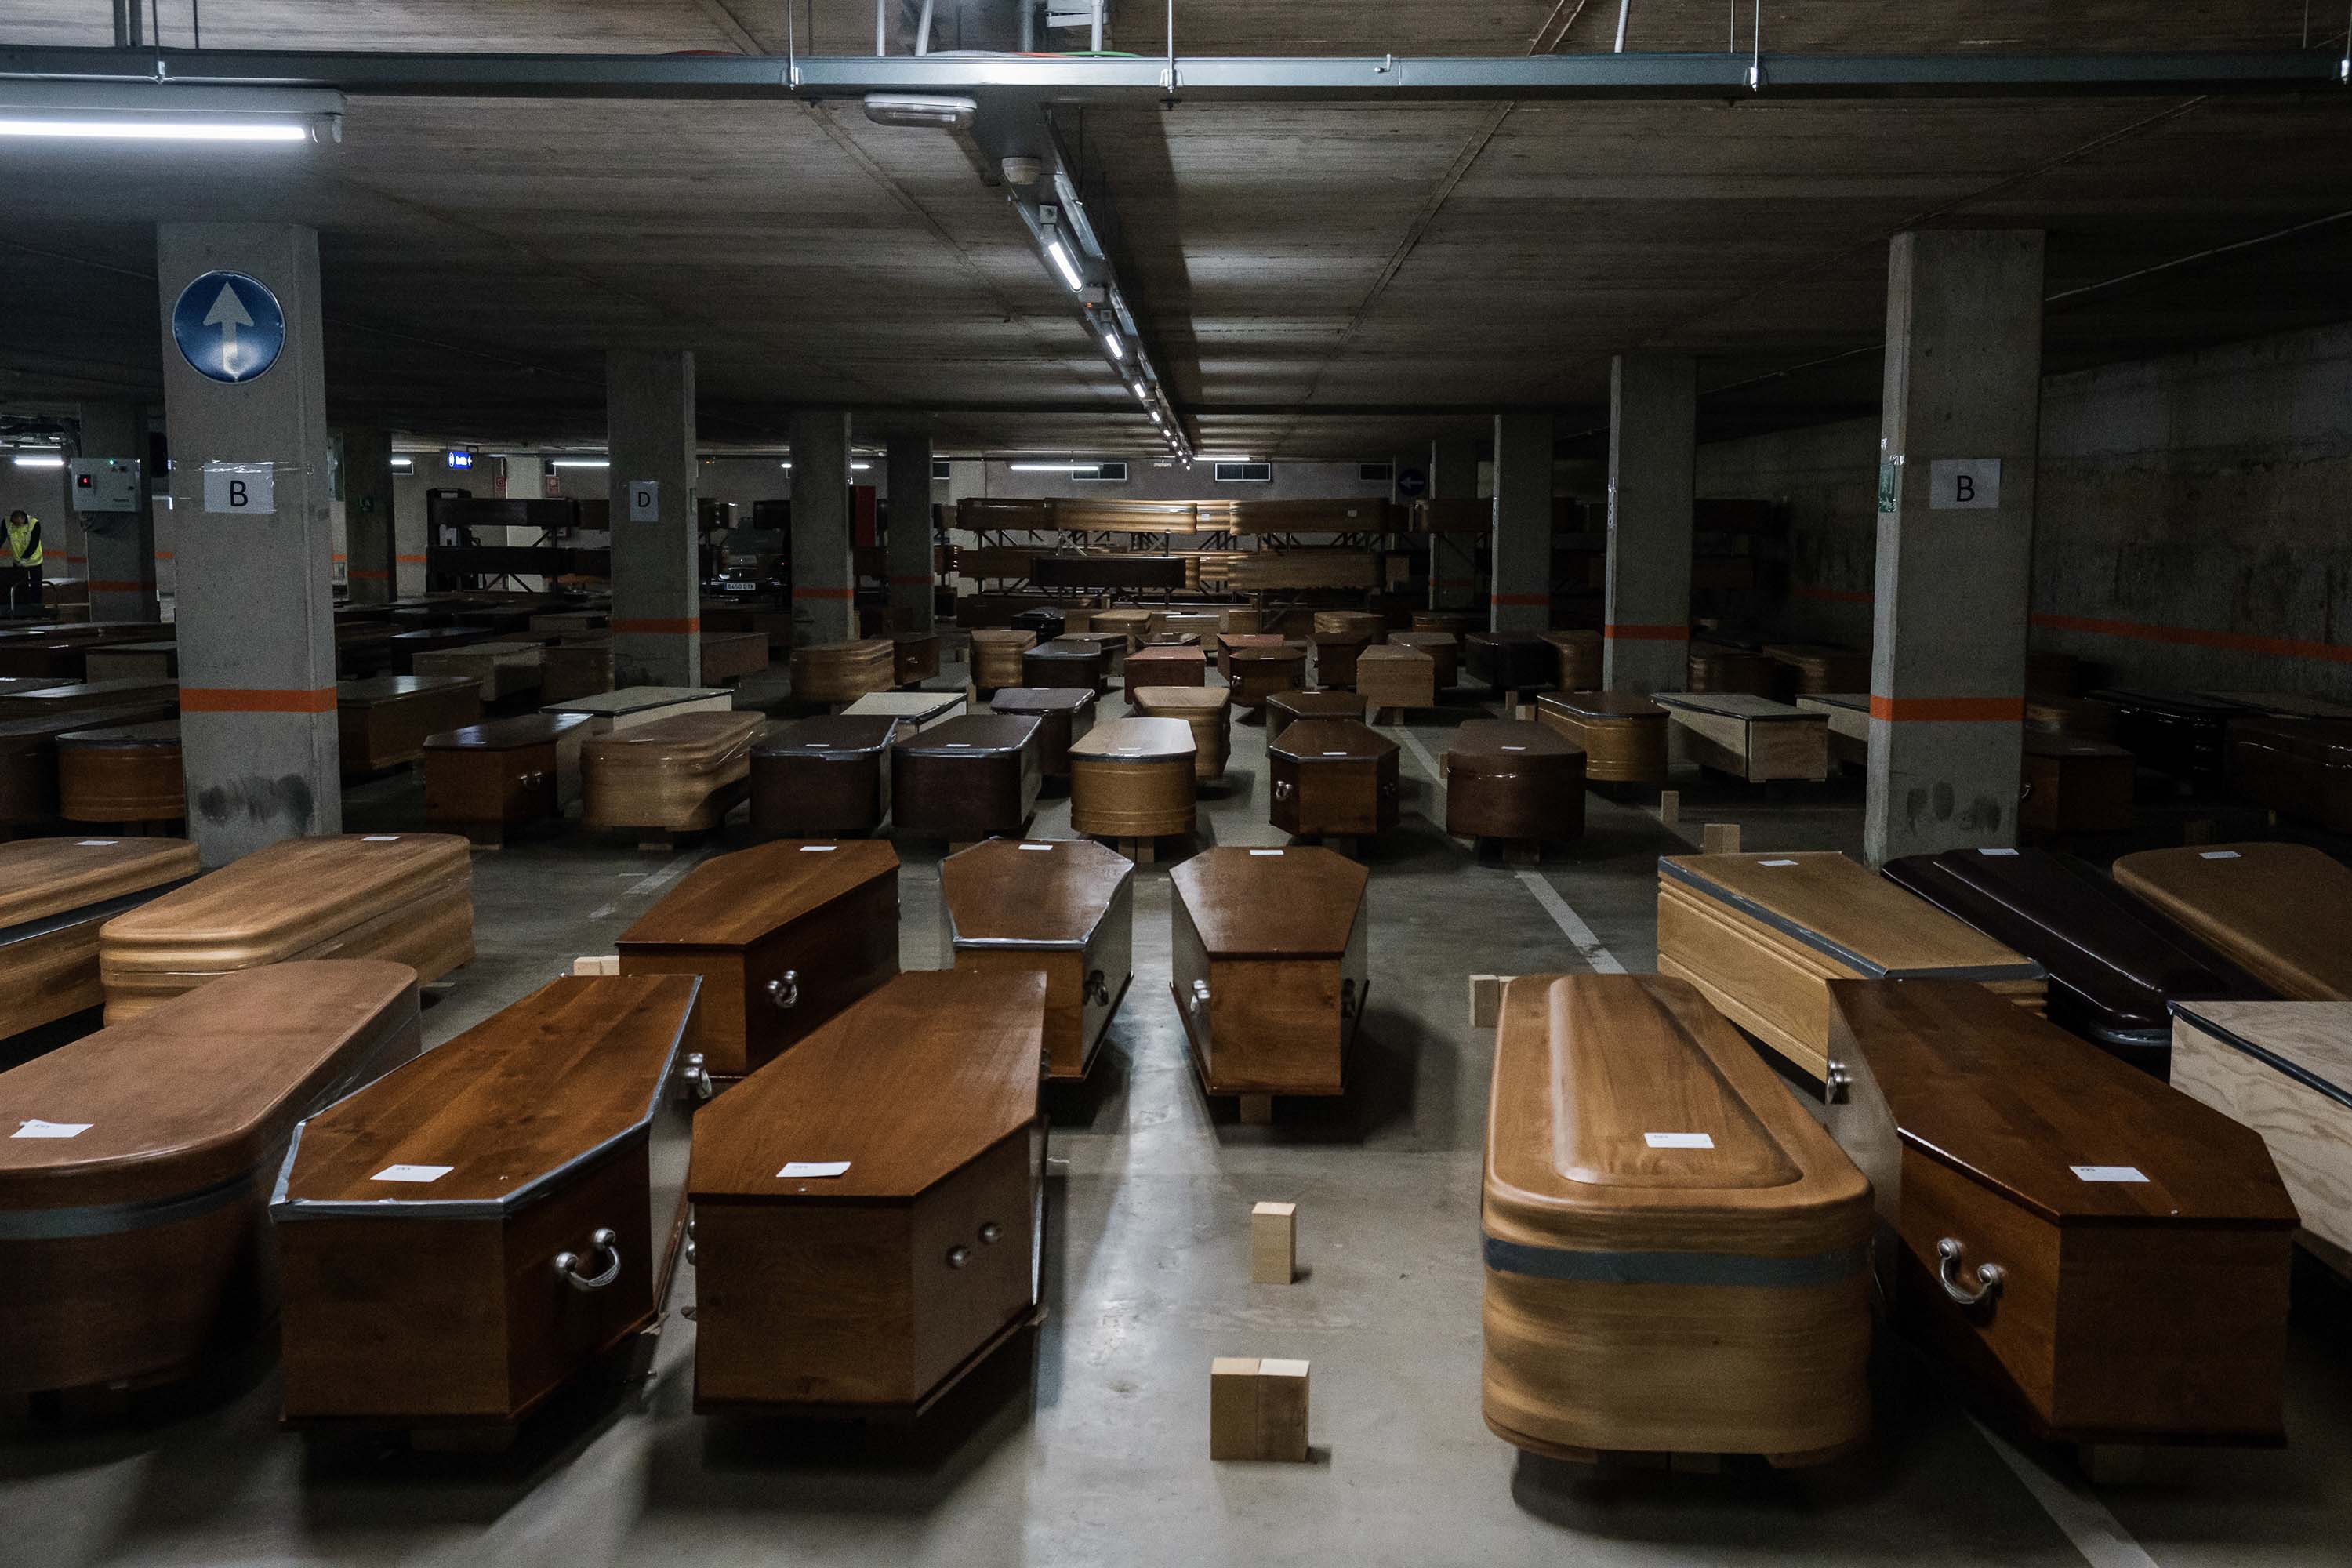 Coffins containing coronavirus victims are pictured in the Collserola mortuary parking lot in Barcelona, Spain, on April 8.